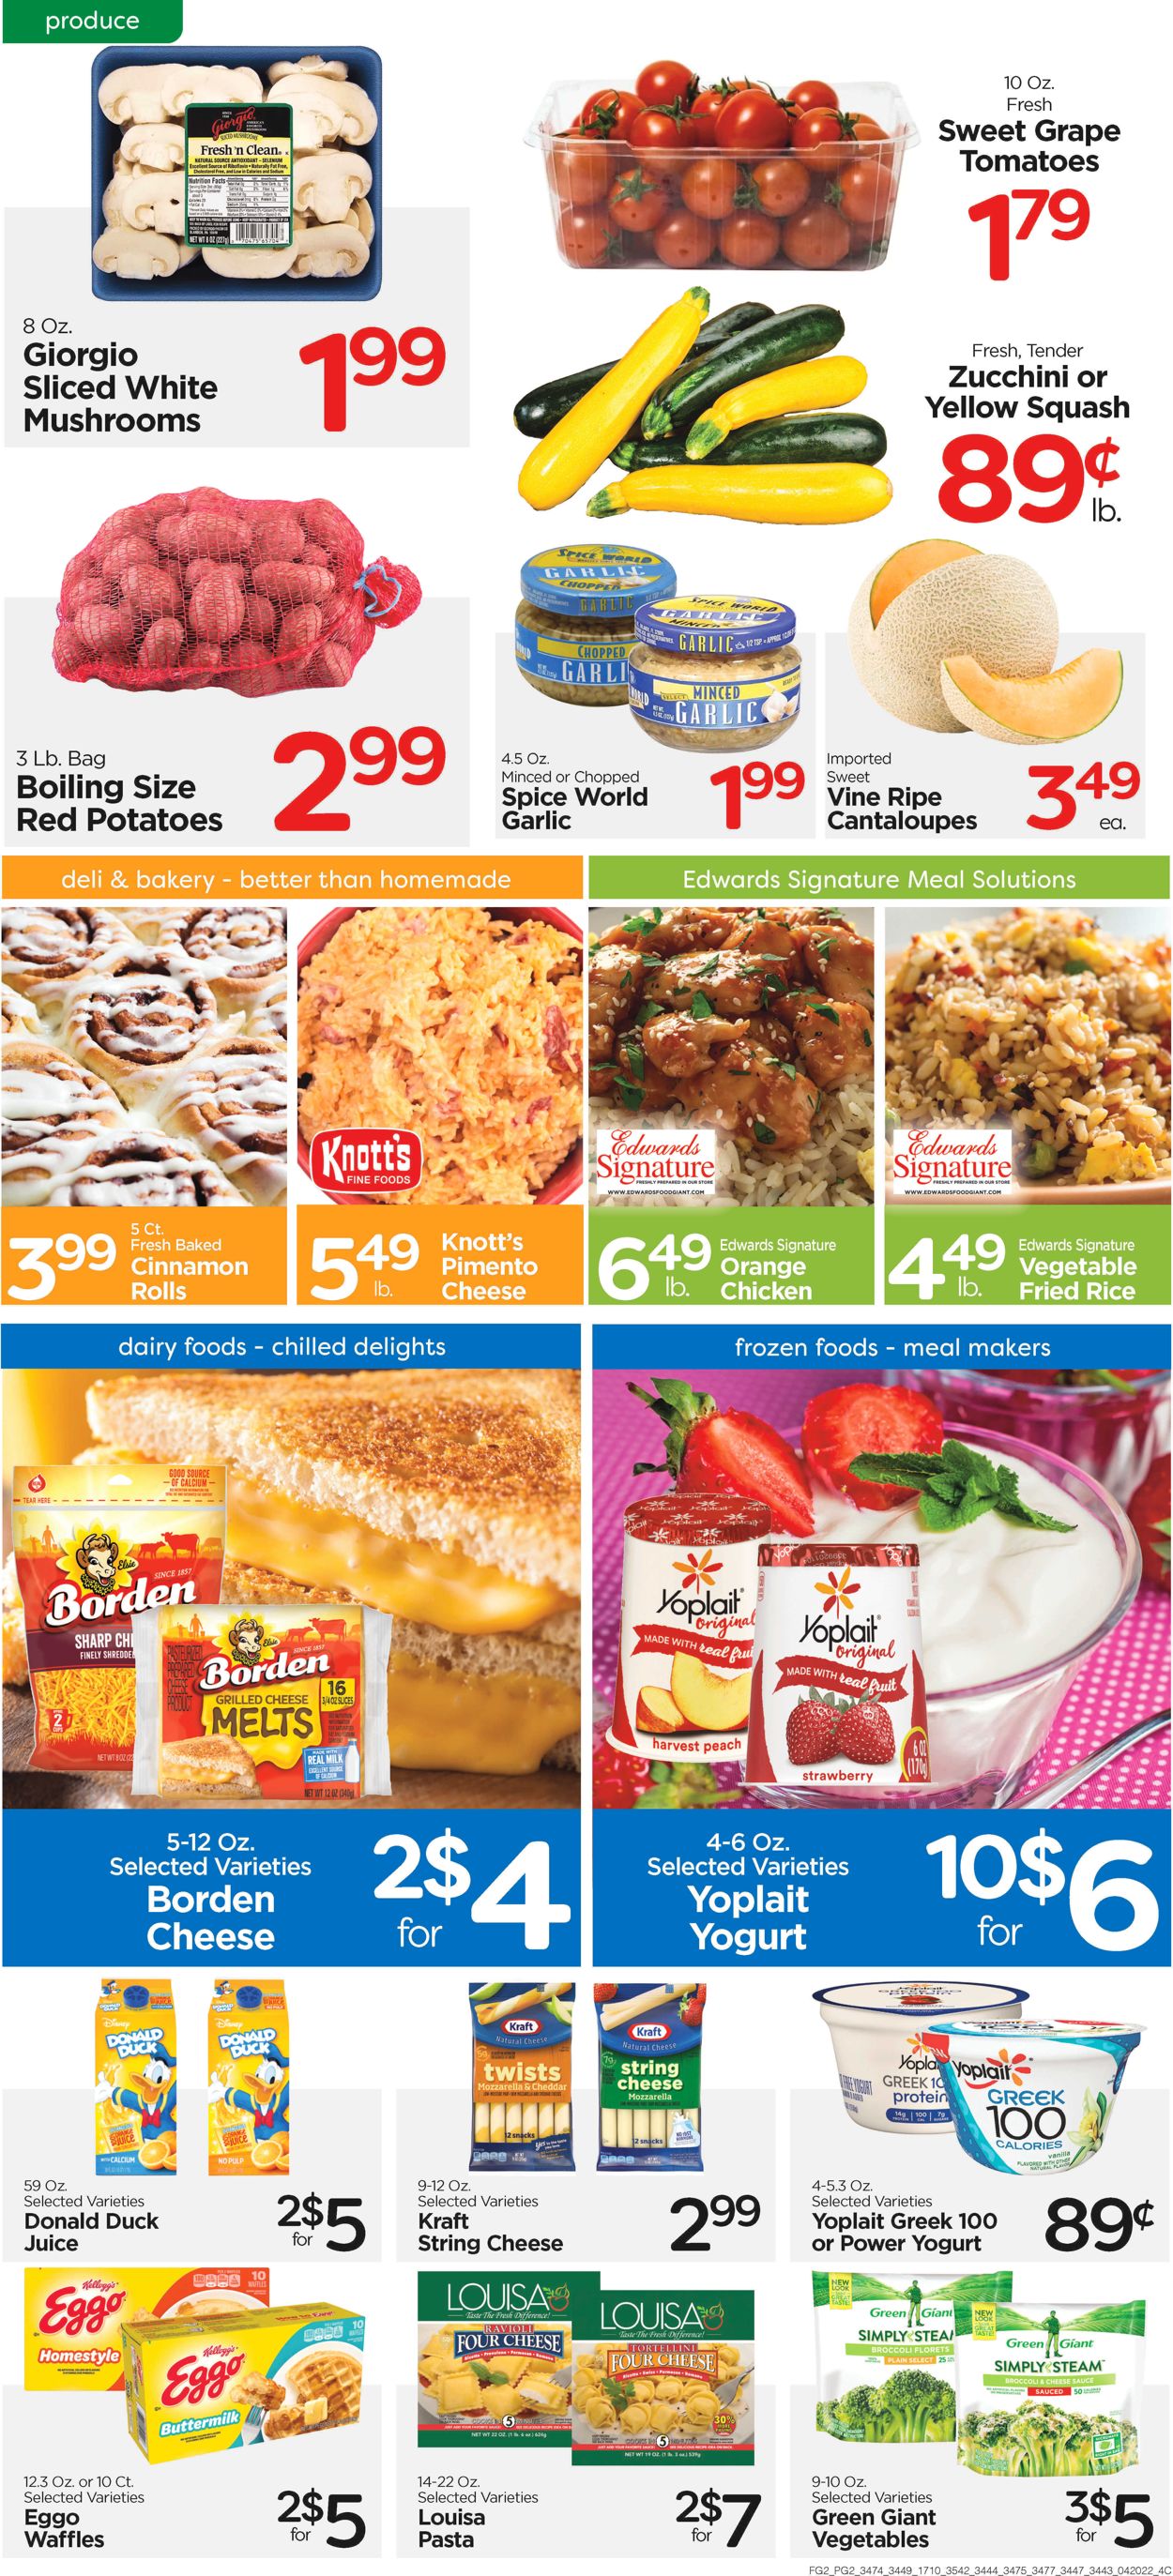 Catalogue Edwards Food Giant from 04/20/2022